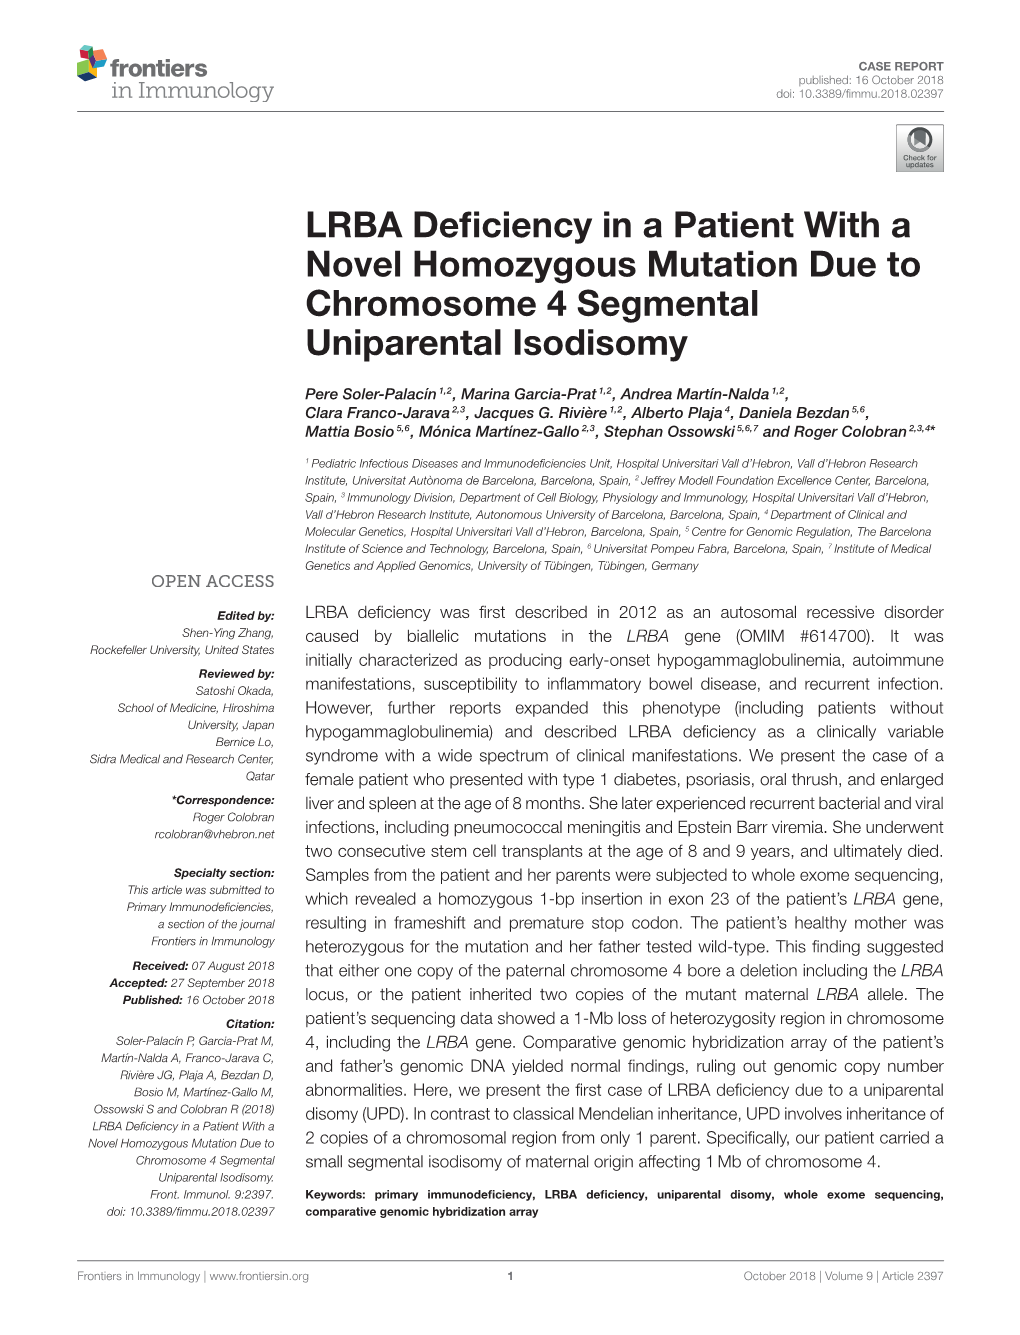 LRBA Deficiency in a Patient with a Novel Homozygous Mutation Due